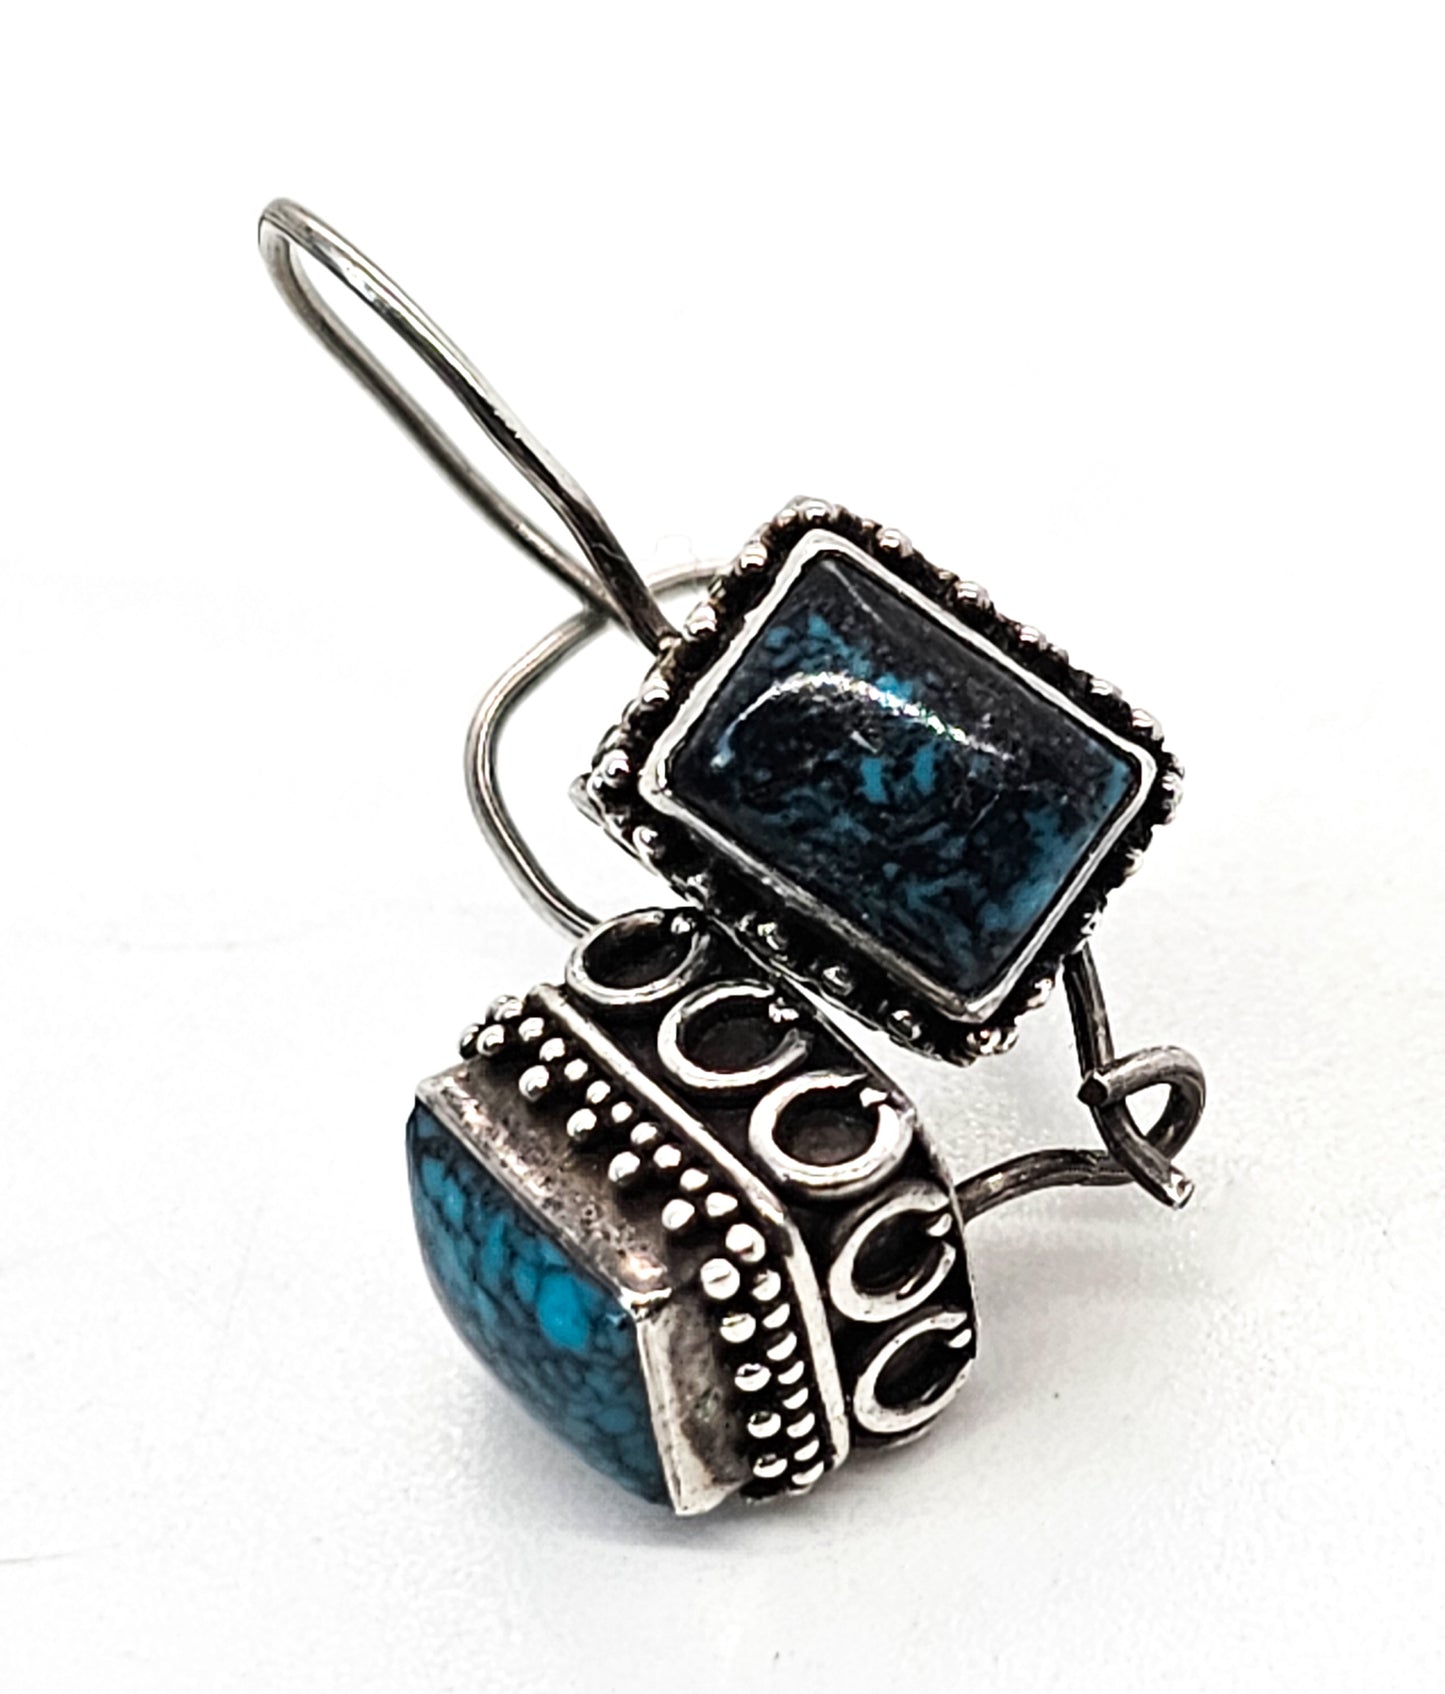 Turquois Bali Balinese style black and blue gemstone sterling silver earrings